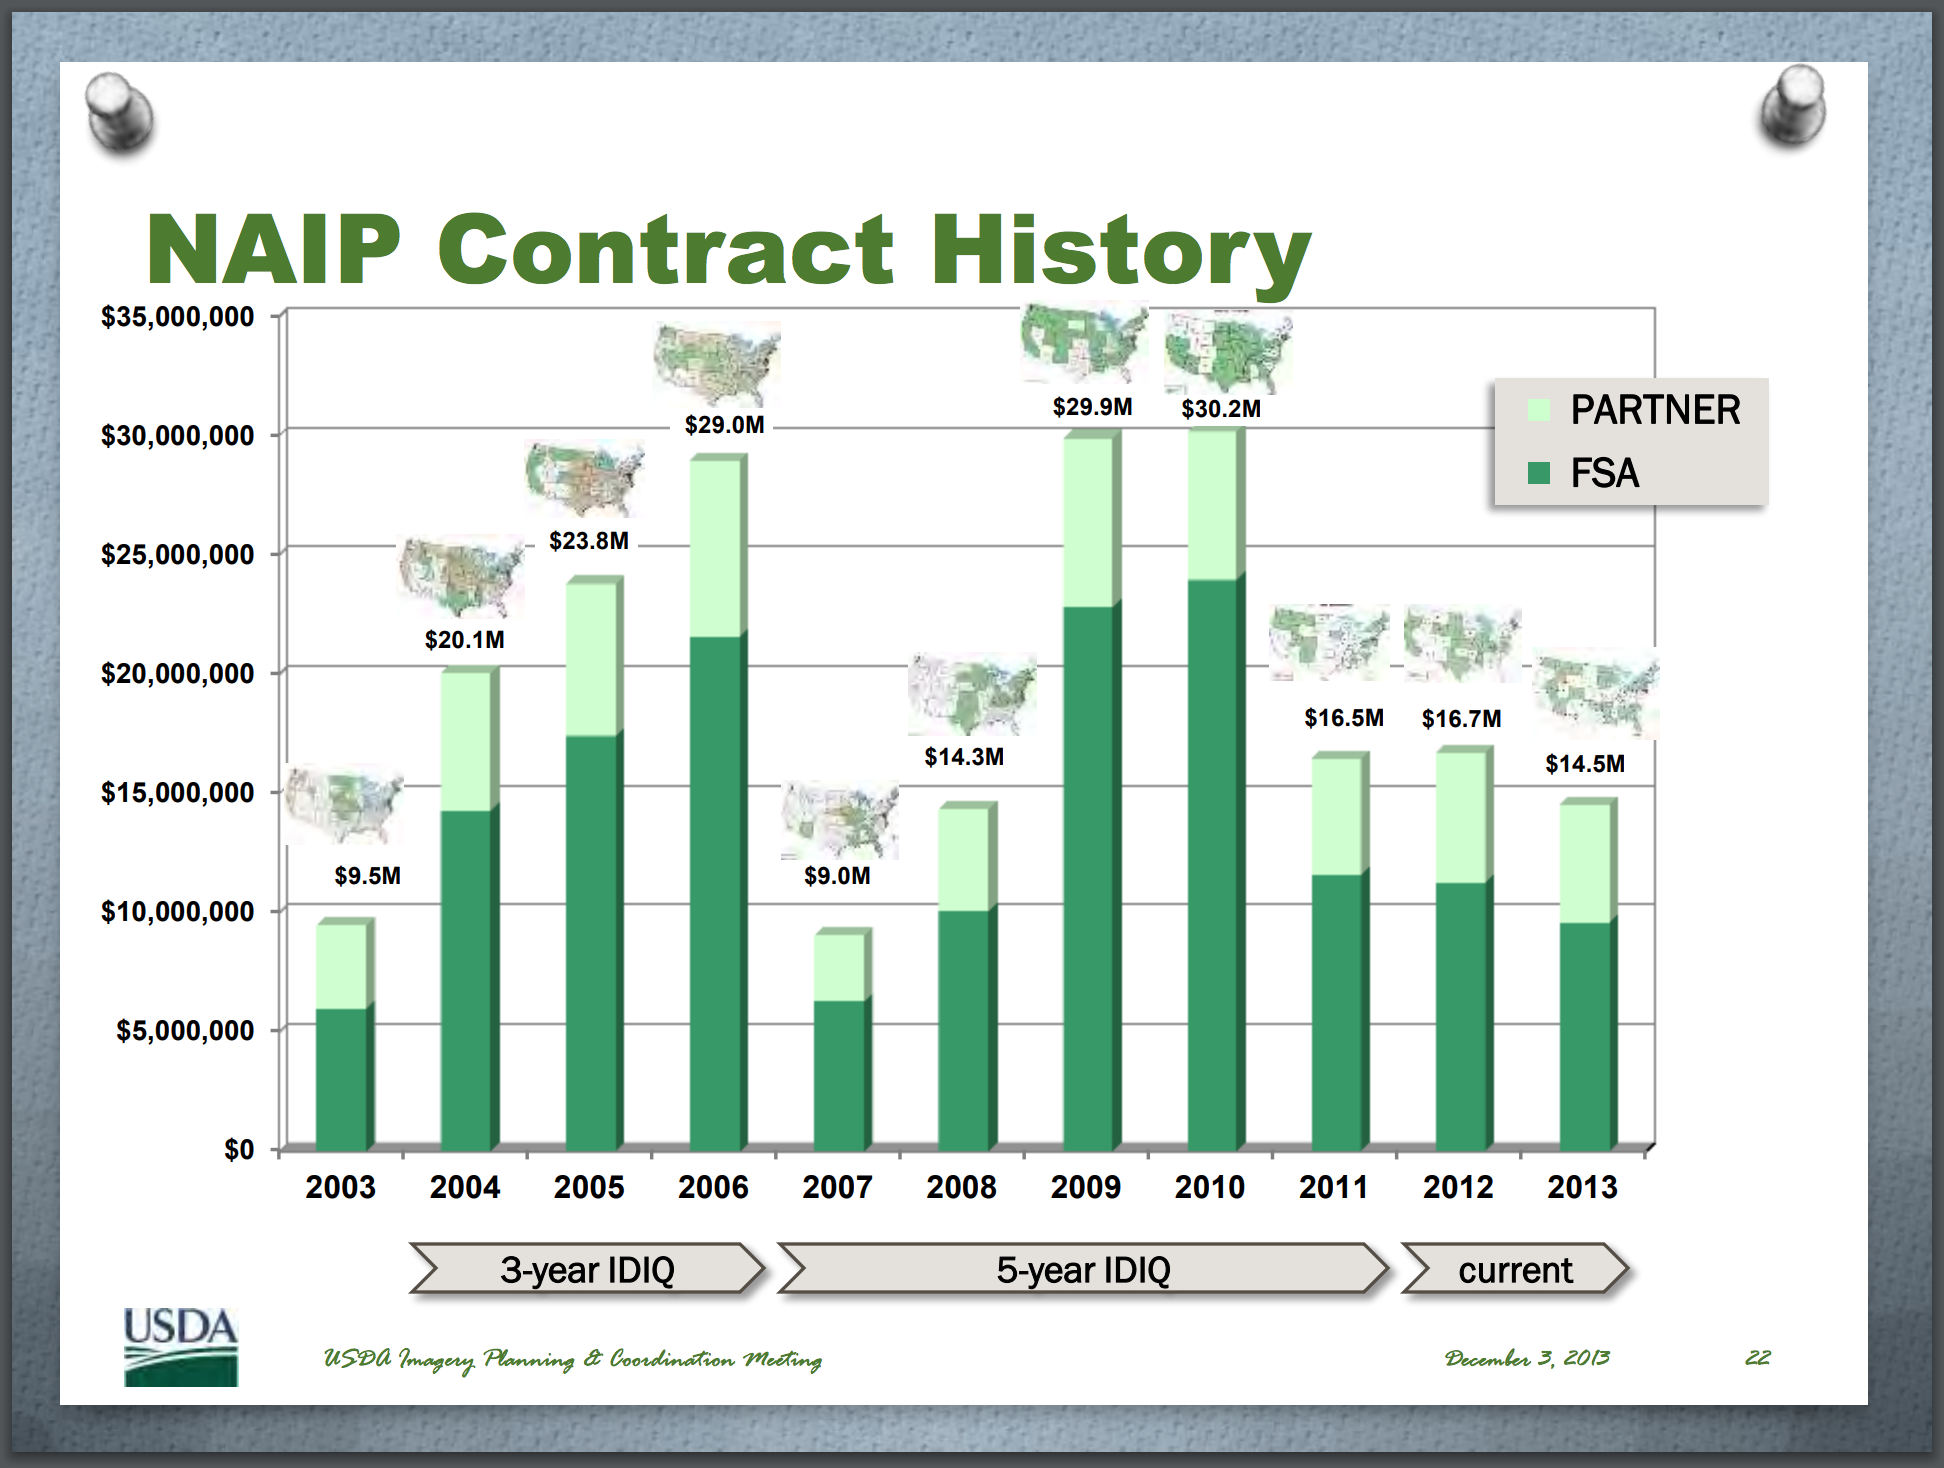 Contract History of the NAIP, 2003-2013